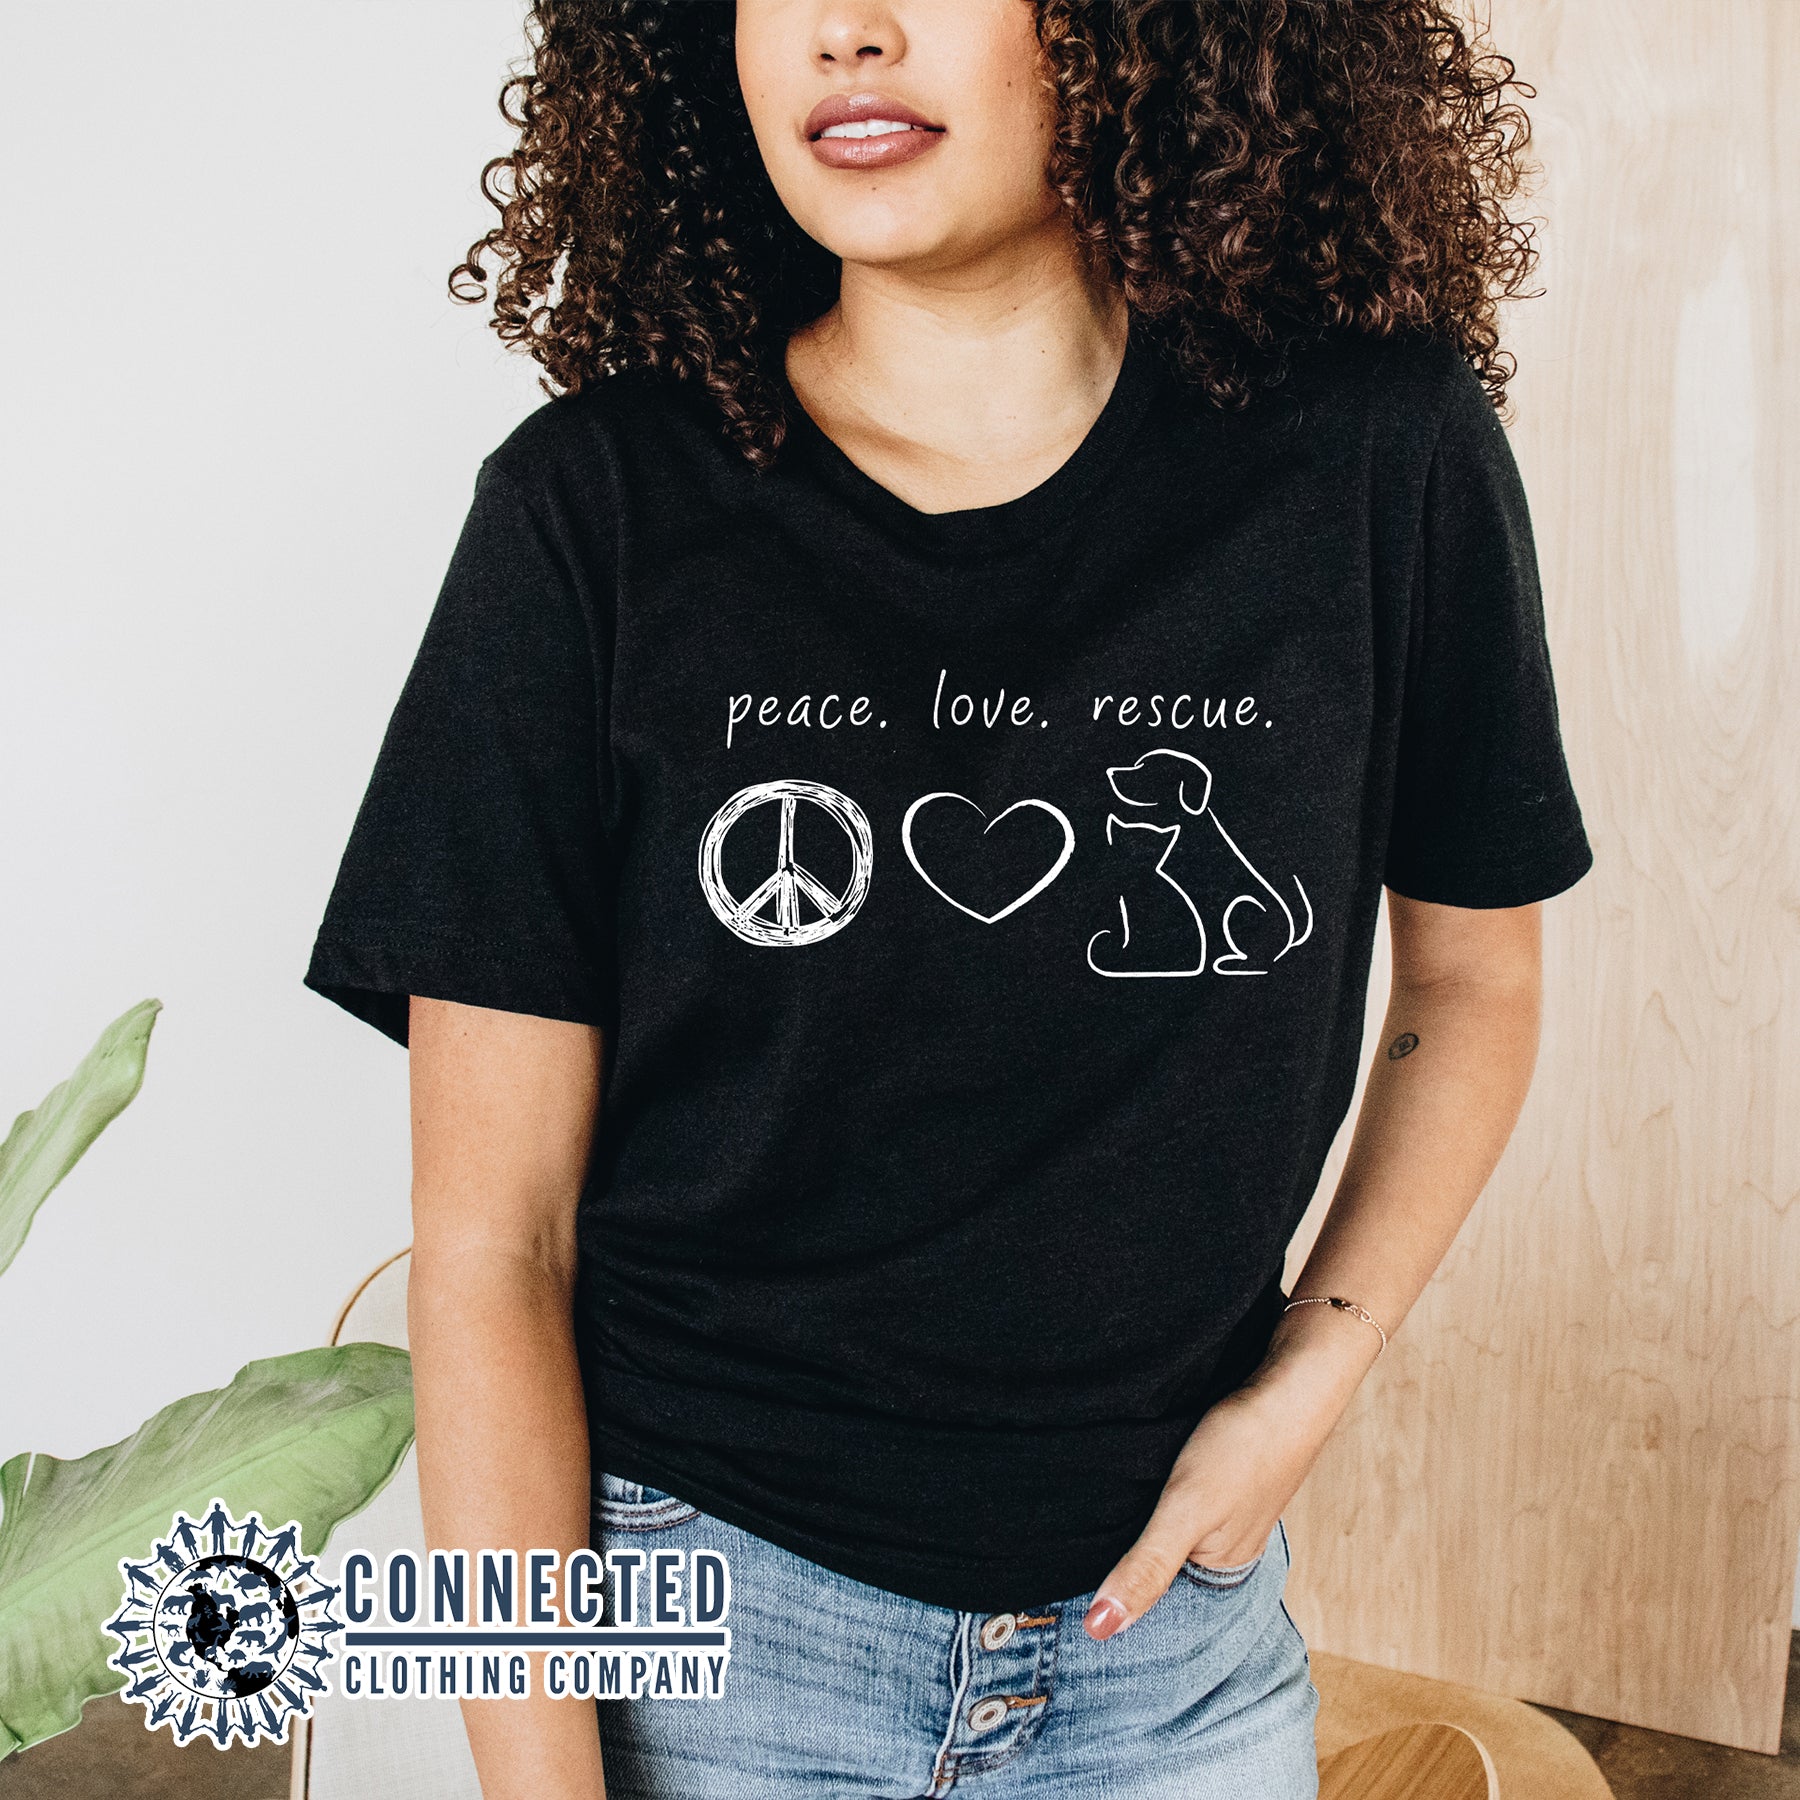 Peace Love Rescue Short-Sleeve Tee - Connected Clothing Company - Ethically and Sustainably Made - 10% donated to Villalobos Animal Rescue Center